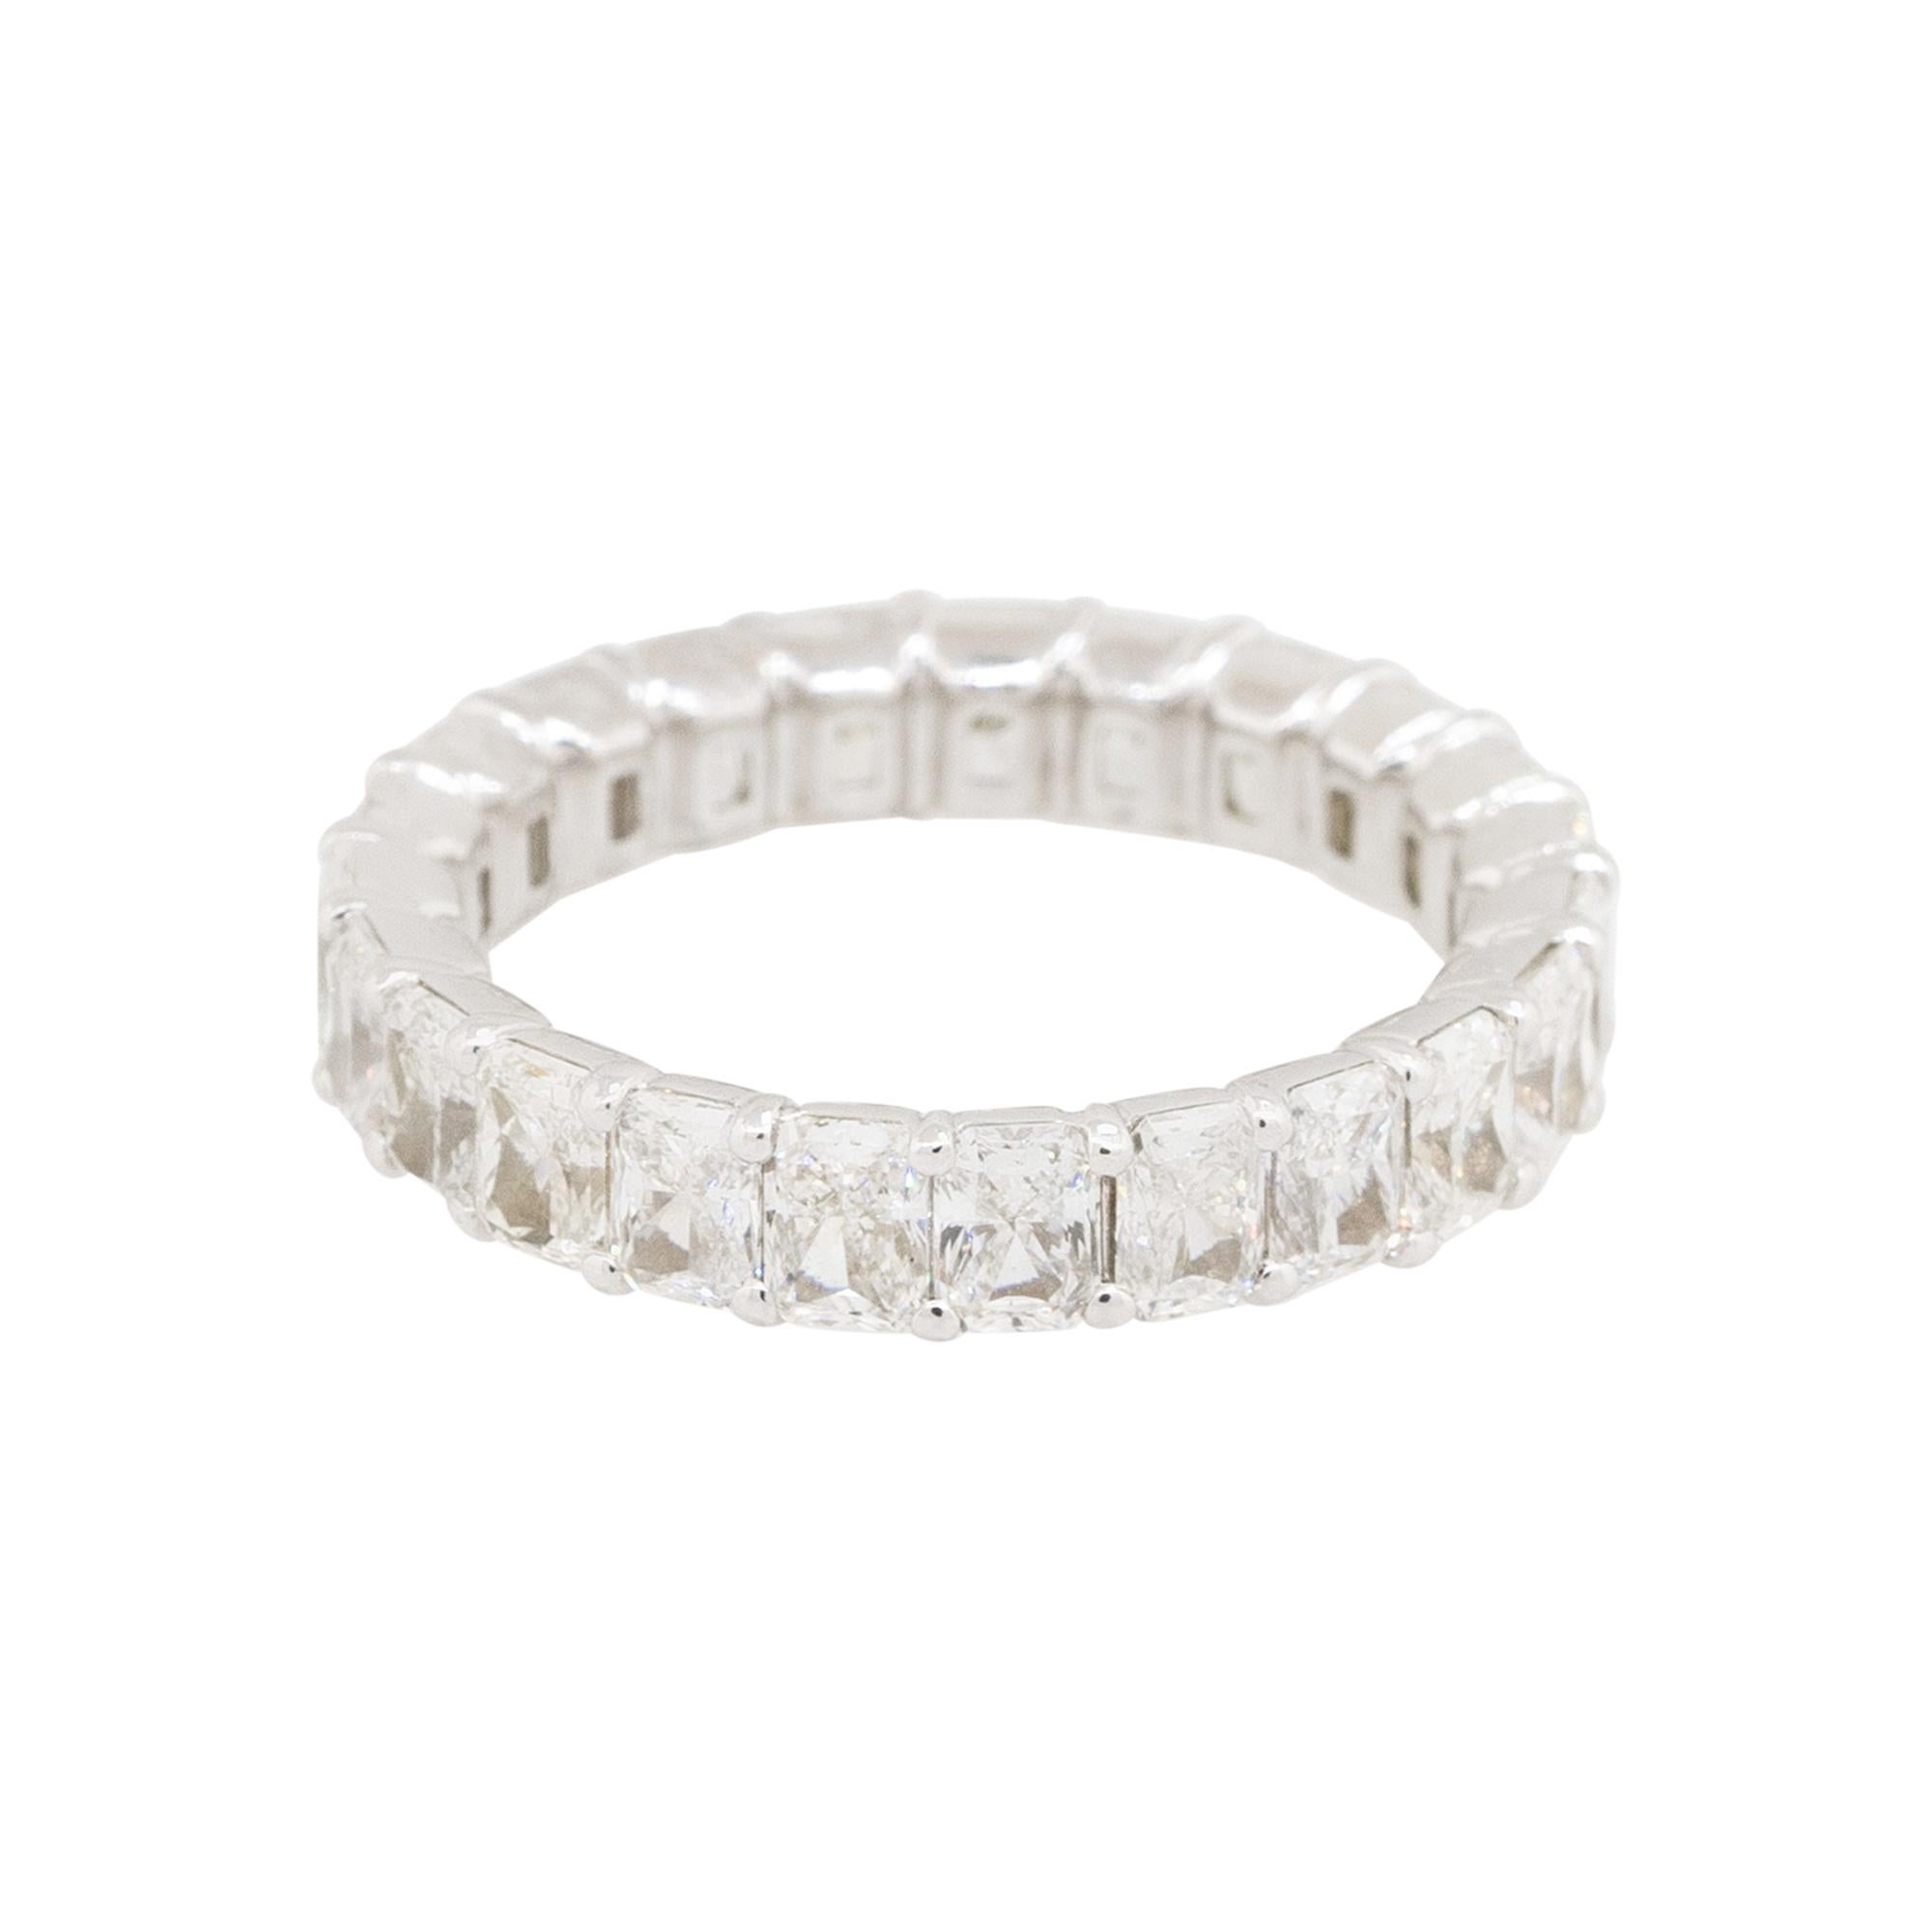 4.31 Carat Radiant Cut Diamond Eternity Band 14 Karat in Stock In Excellent Condition For Sale In Boca Raton, FL